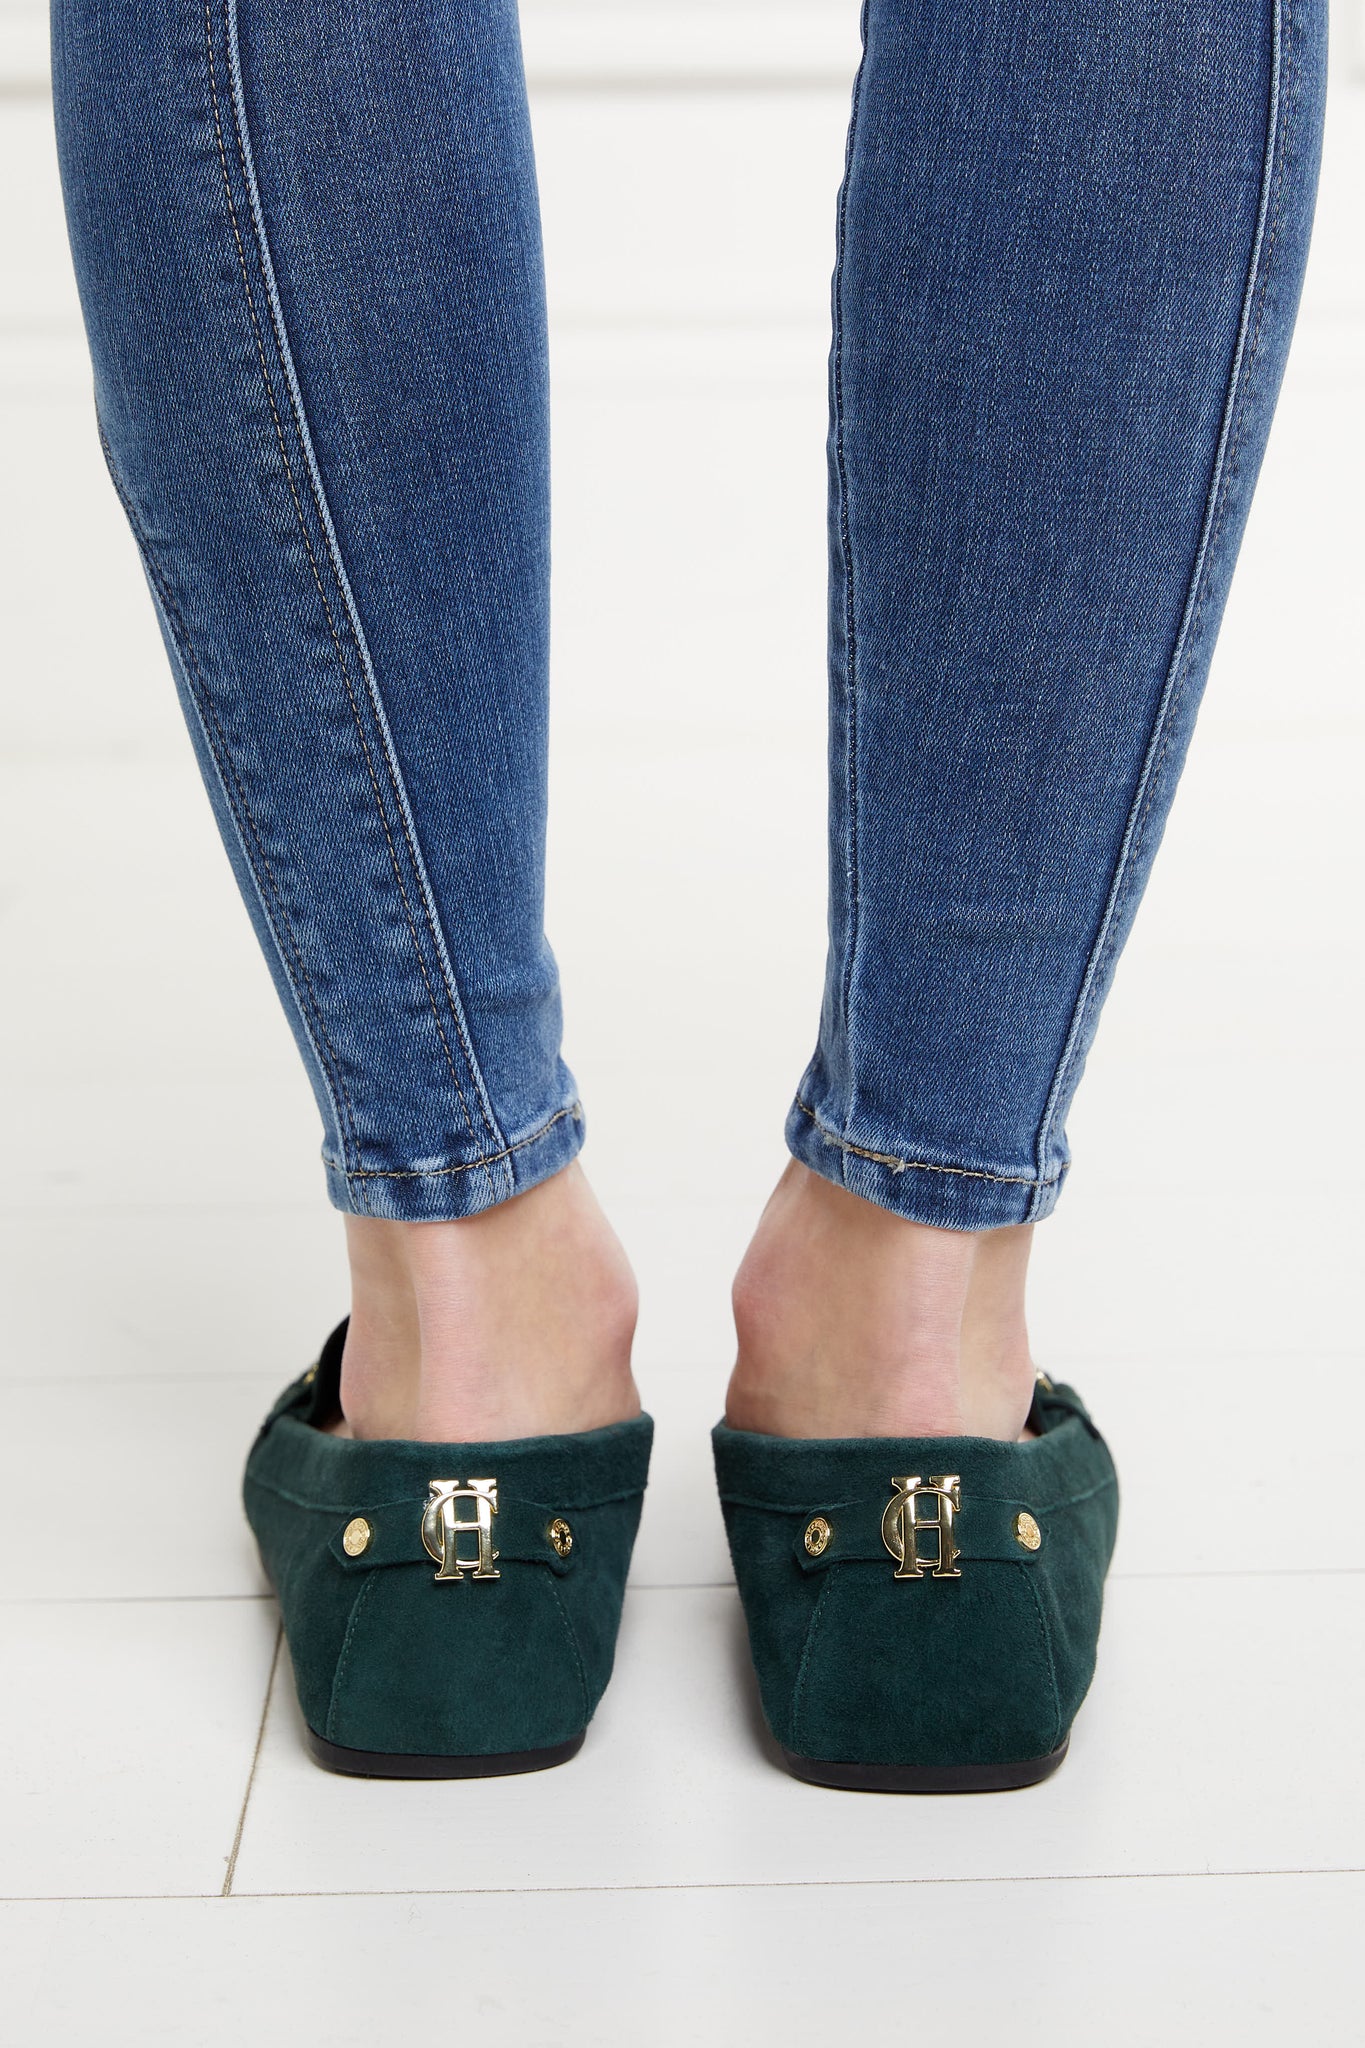 Back of classic emerald green suede loafers with a leather sole and gold hardware paired with a classic denim skinny jean